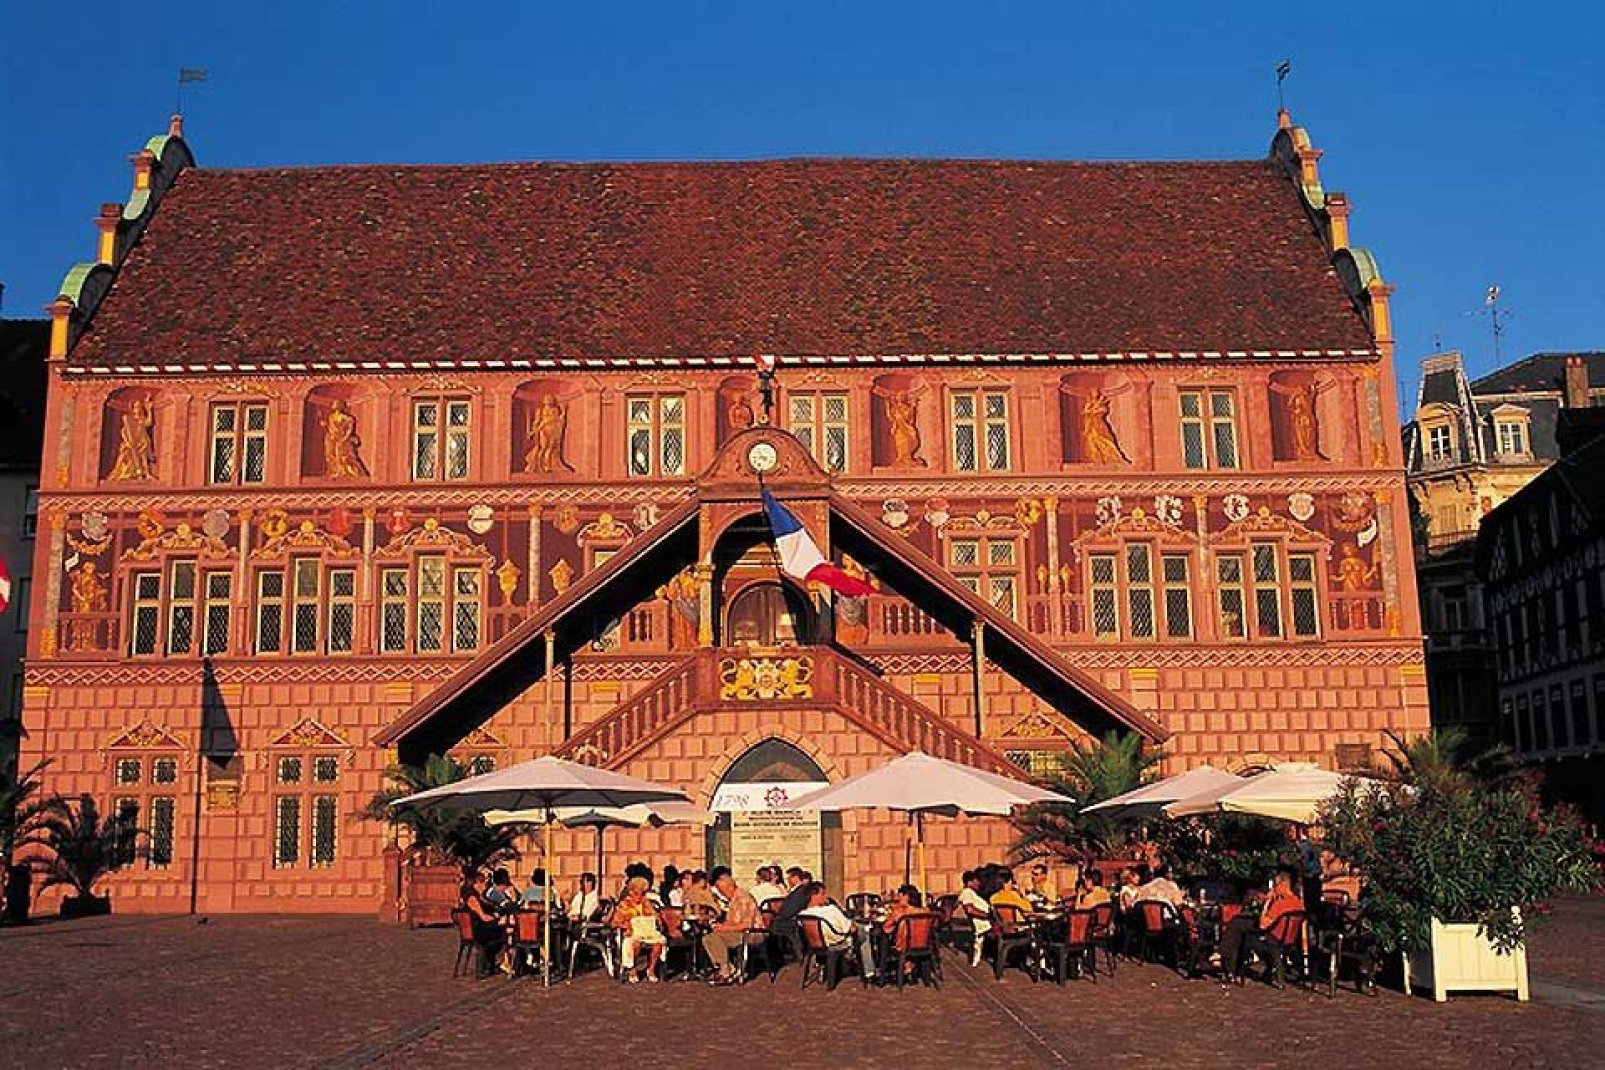 This monument, built in 1552, is a typical example of the Rhineland Renaissance style. Inside, visitors can discover wall frescoes dating back to the 16th century.